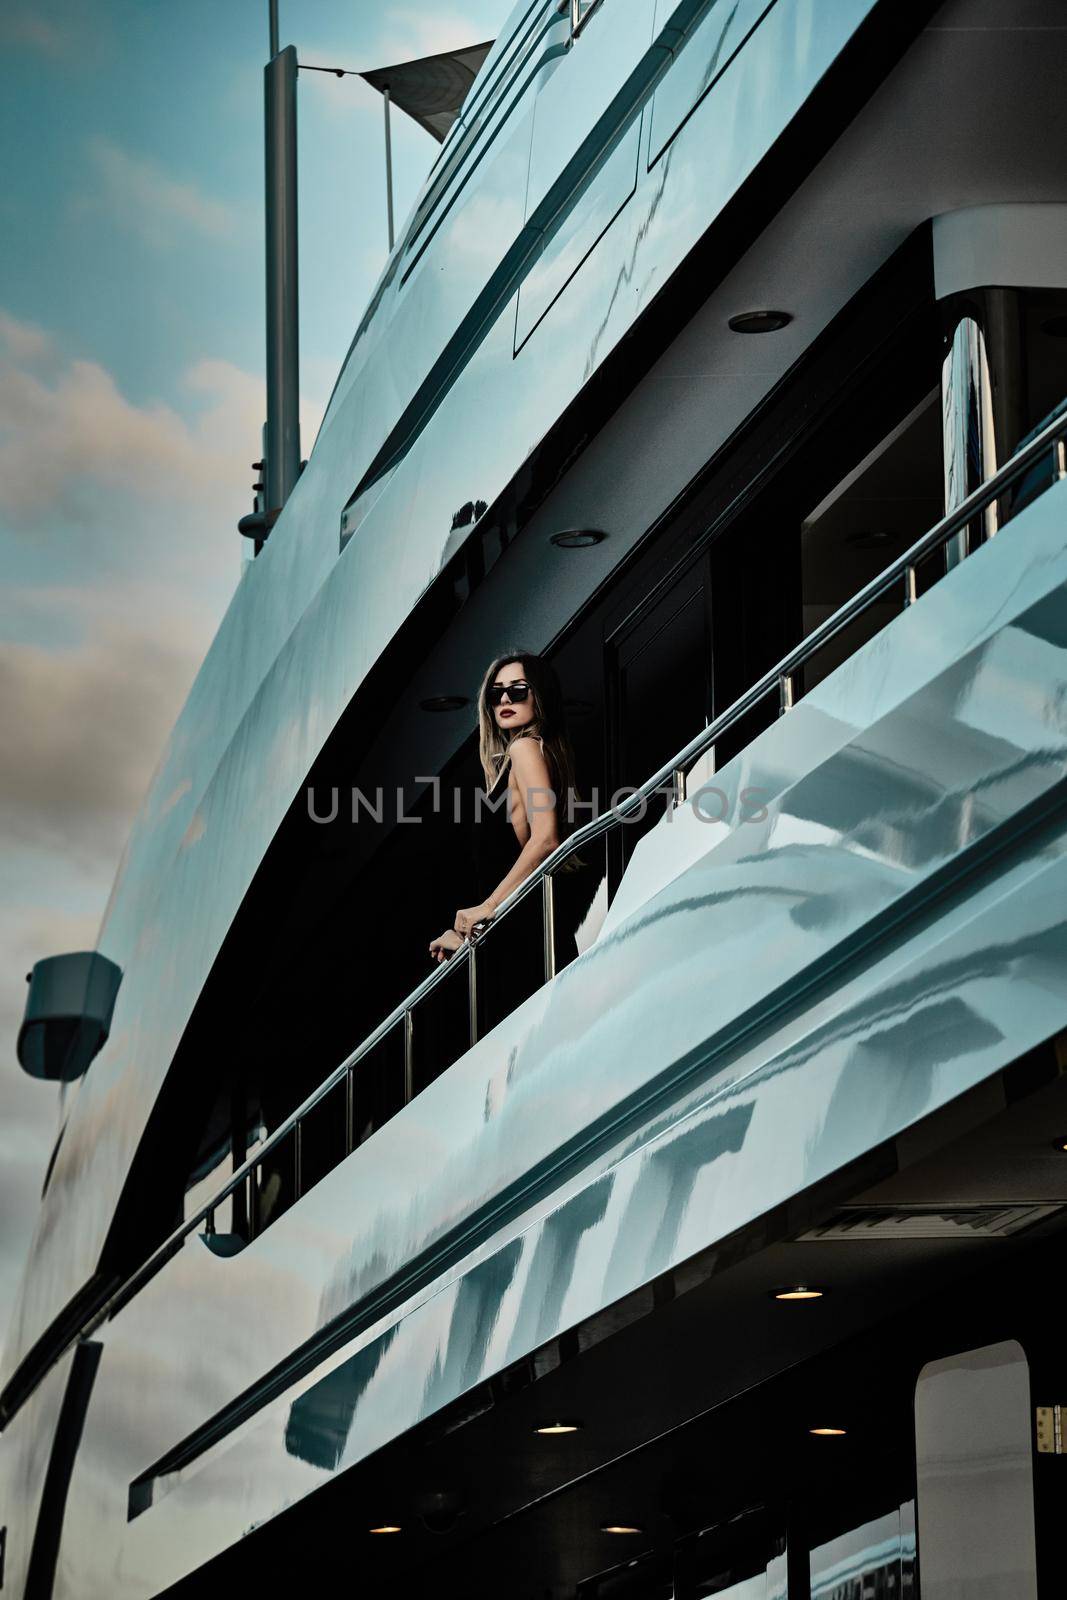 A glamorous diva in an evening dress of black color and sunglasses stands on the top deck of a huge yacht in anticipation by vladimirdrozdin